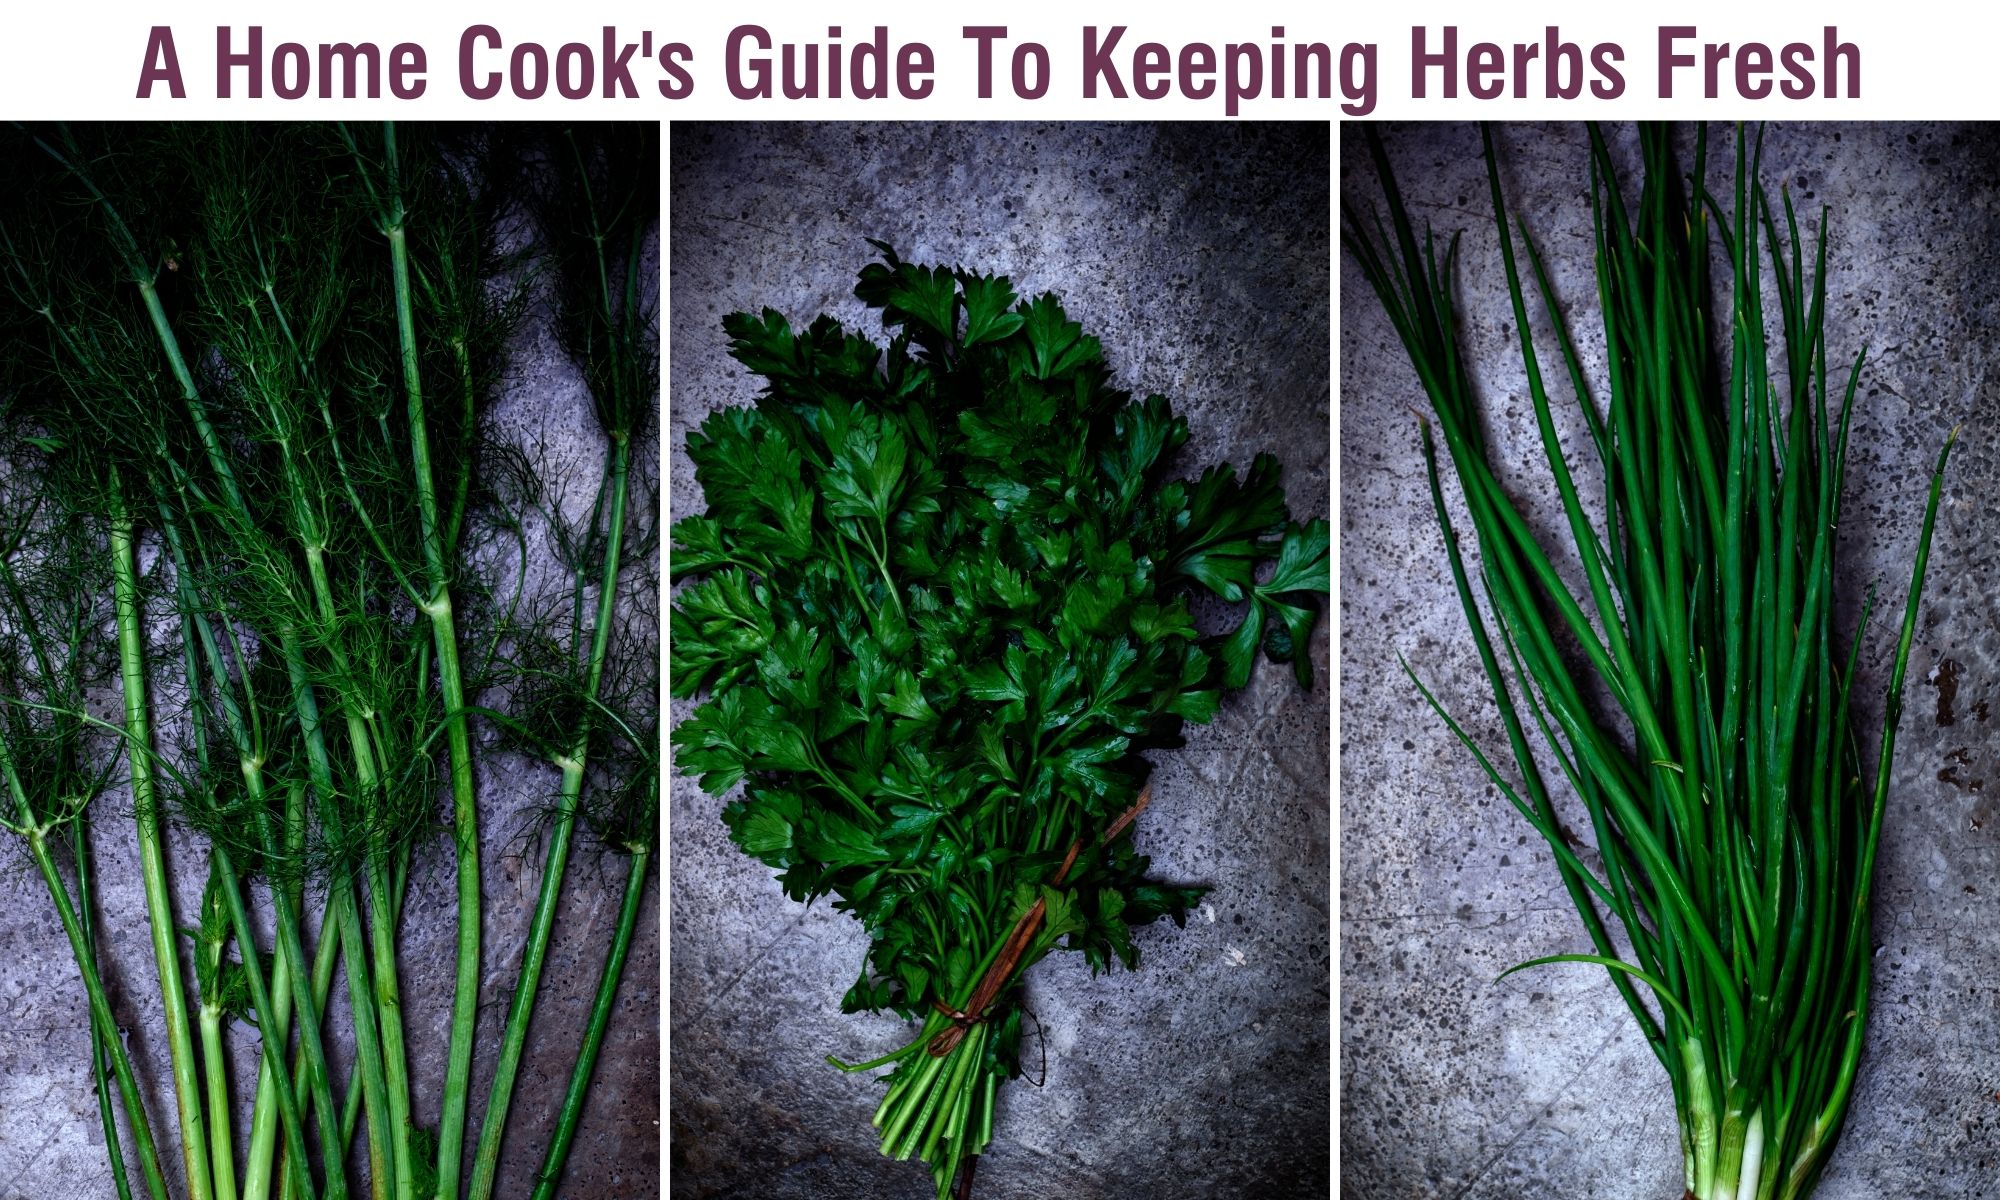 Three side by side bunches of fresh herbs with text above saying "a home cook's guide to keeping herbs fresh"